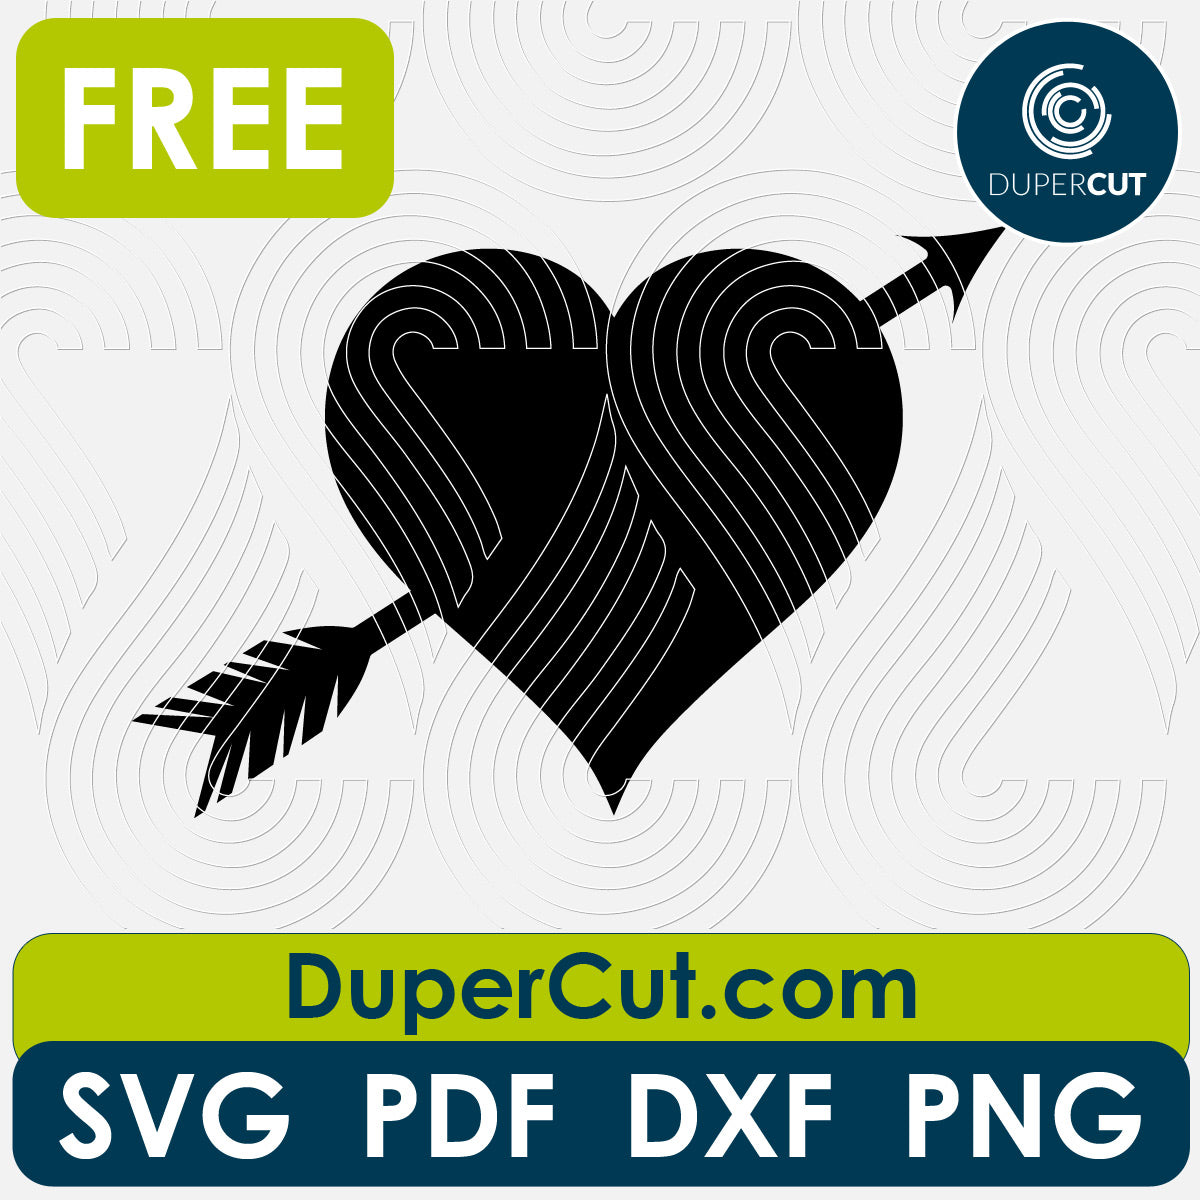 Heart shape with arrow free cutting template SVG PNG DXF files for Glowforge, Cricut, Silhouette, CNC laser router by DuperCut.com